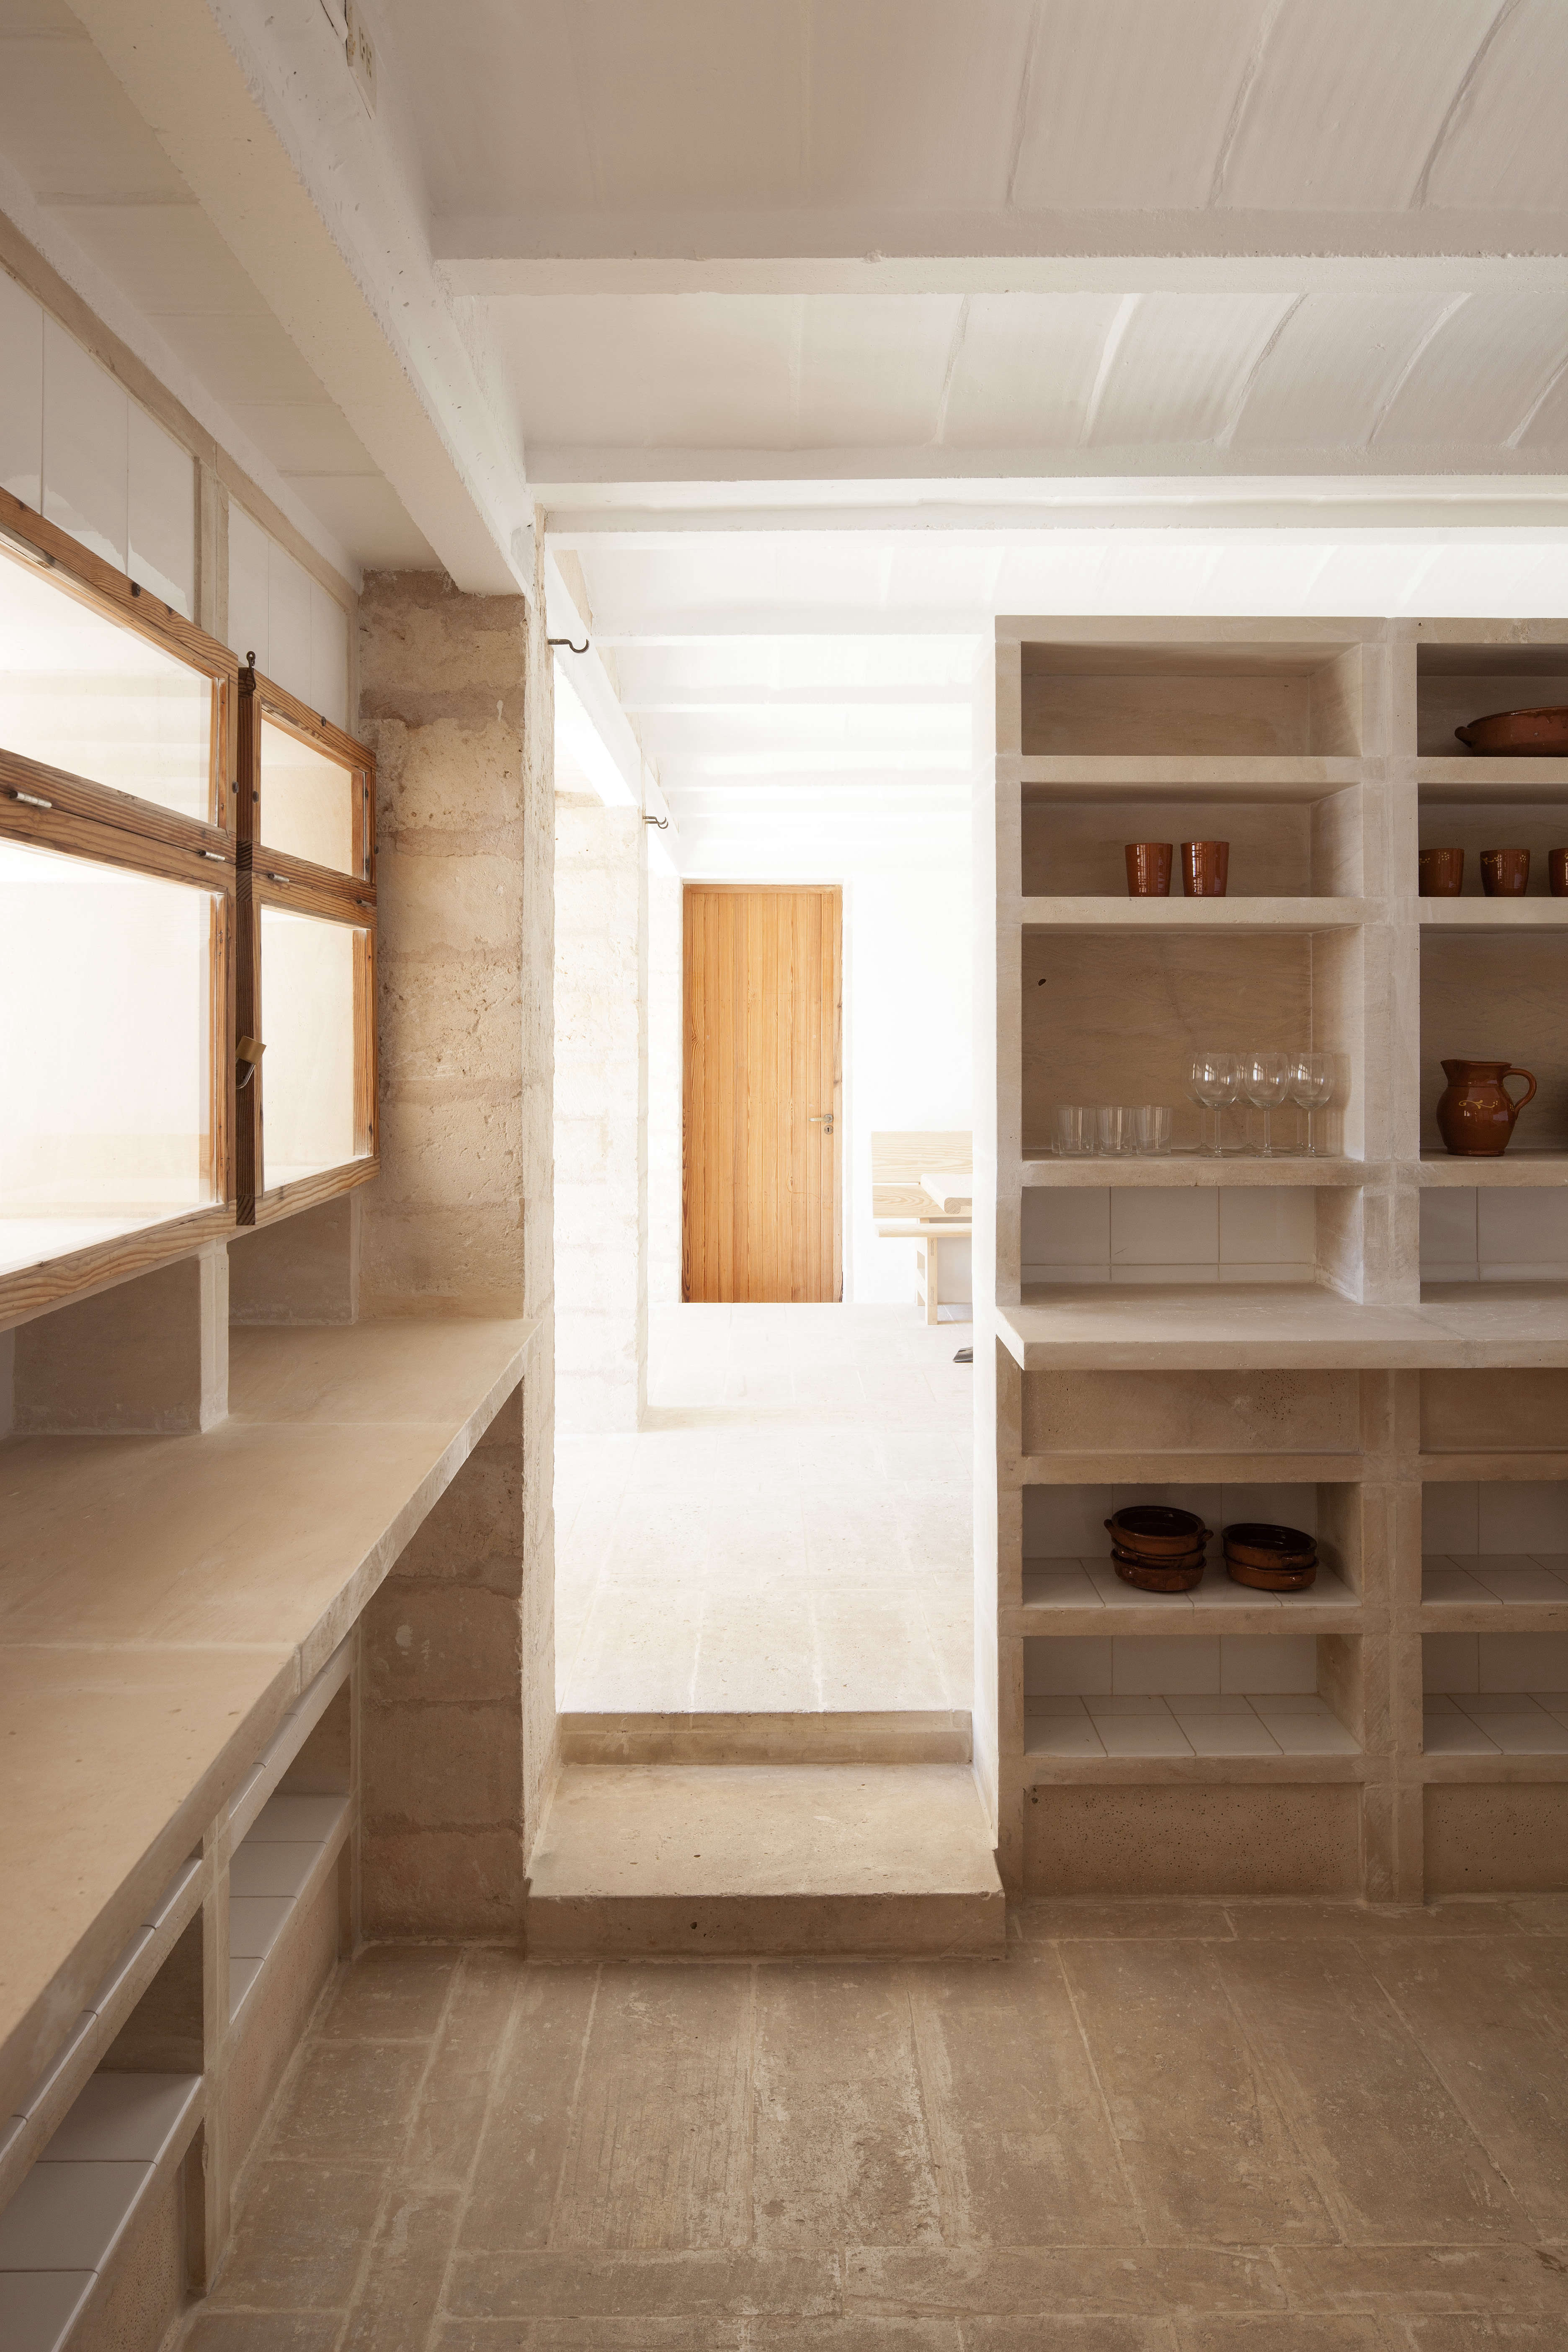 A concrete kitchen of open shelving, tiled under-the-counter shelves, and spare kitchenware.